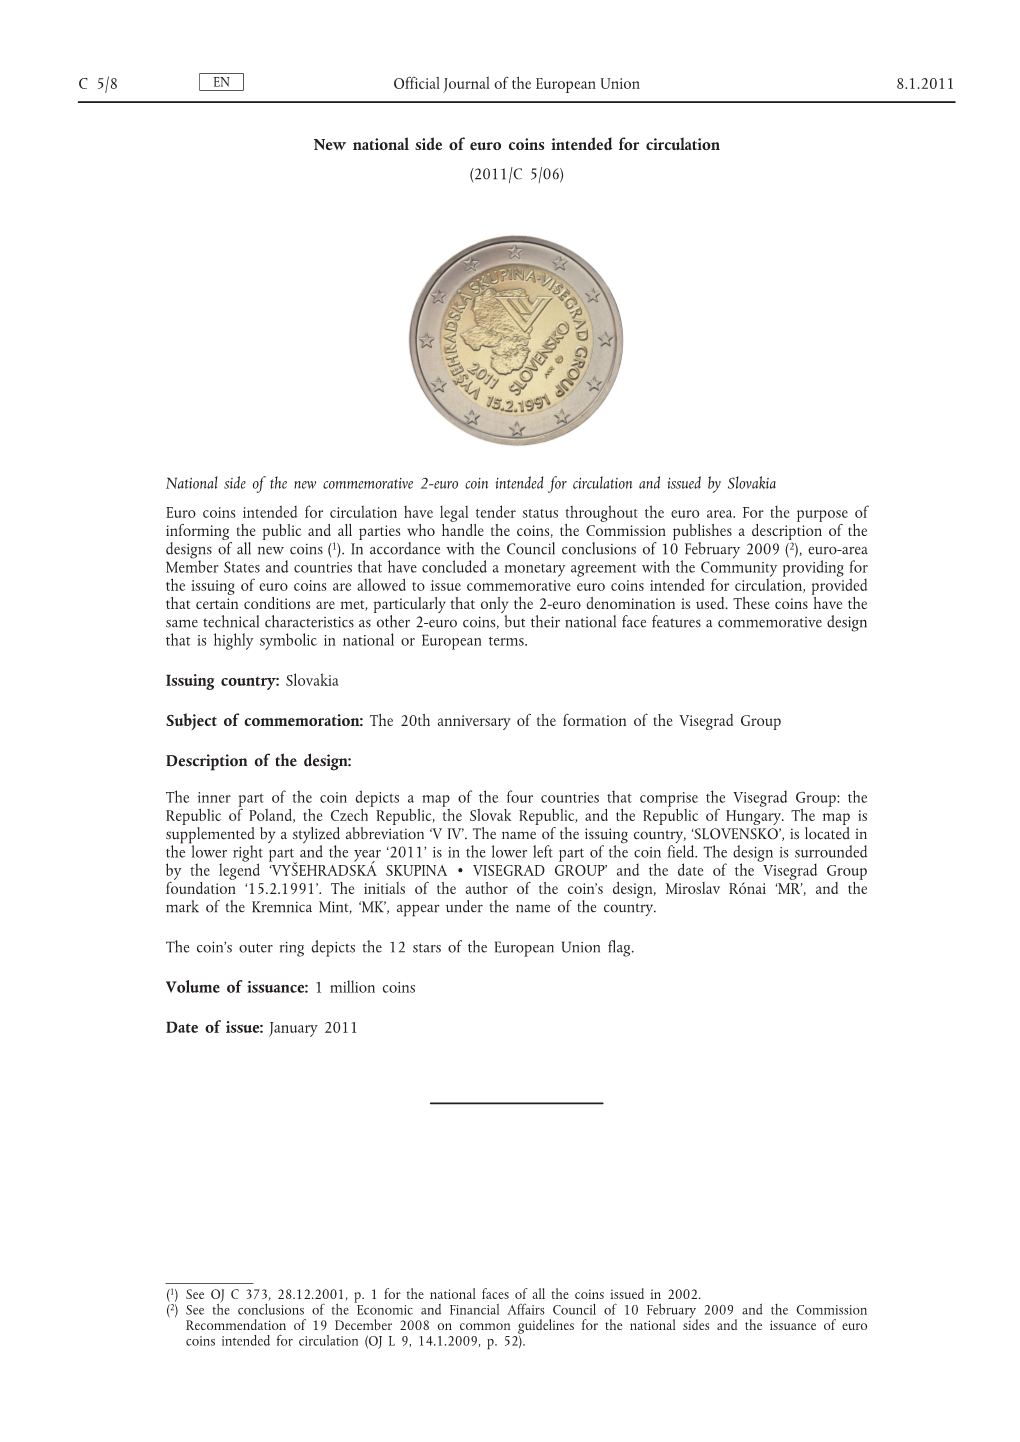 New National Side of Euro Coins Intended for Circulation (2011/C 5/06)